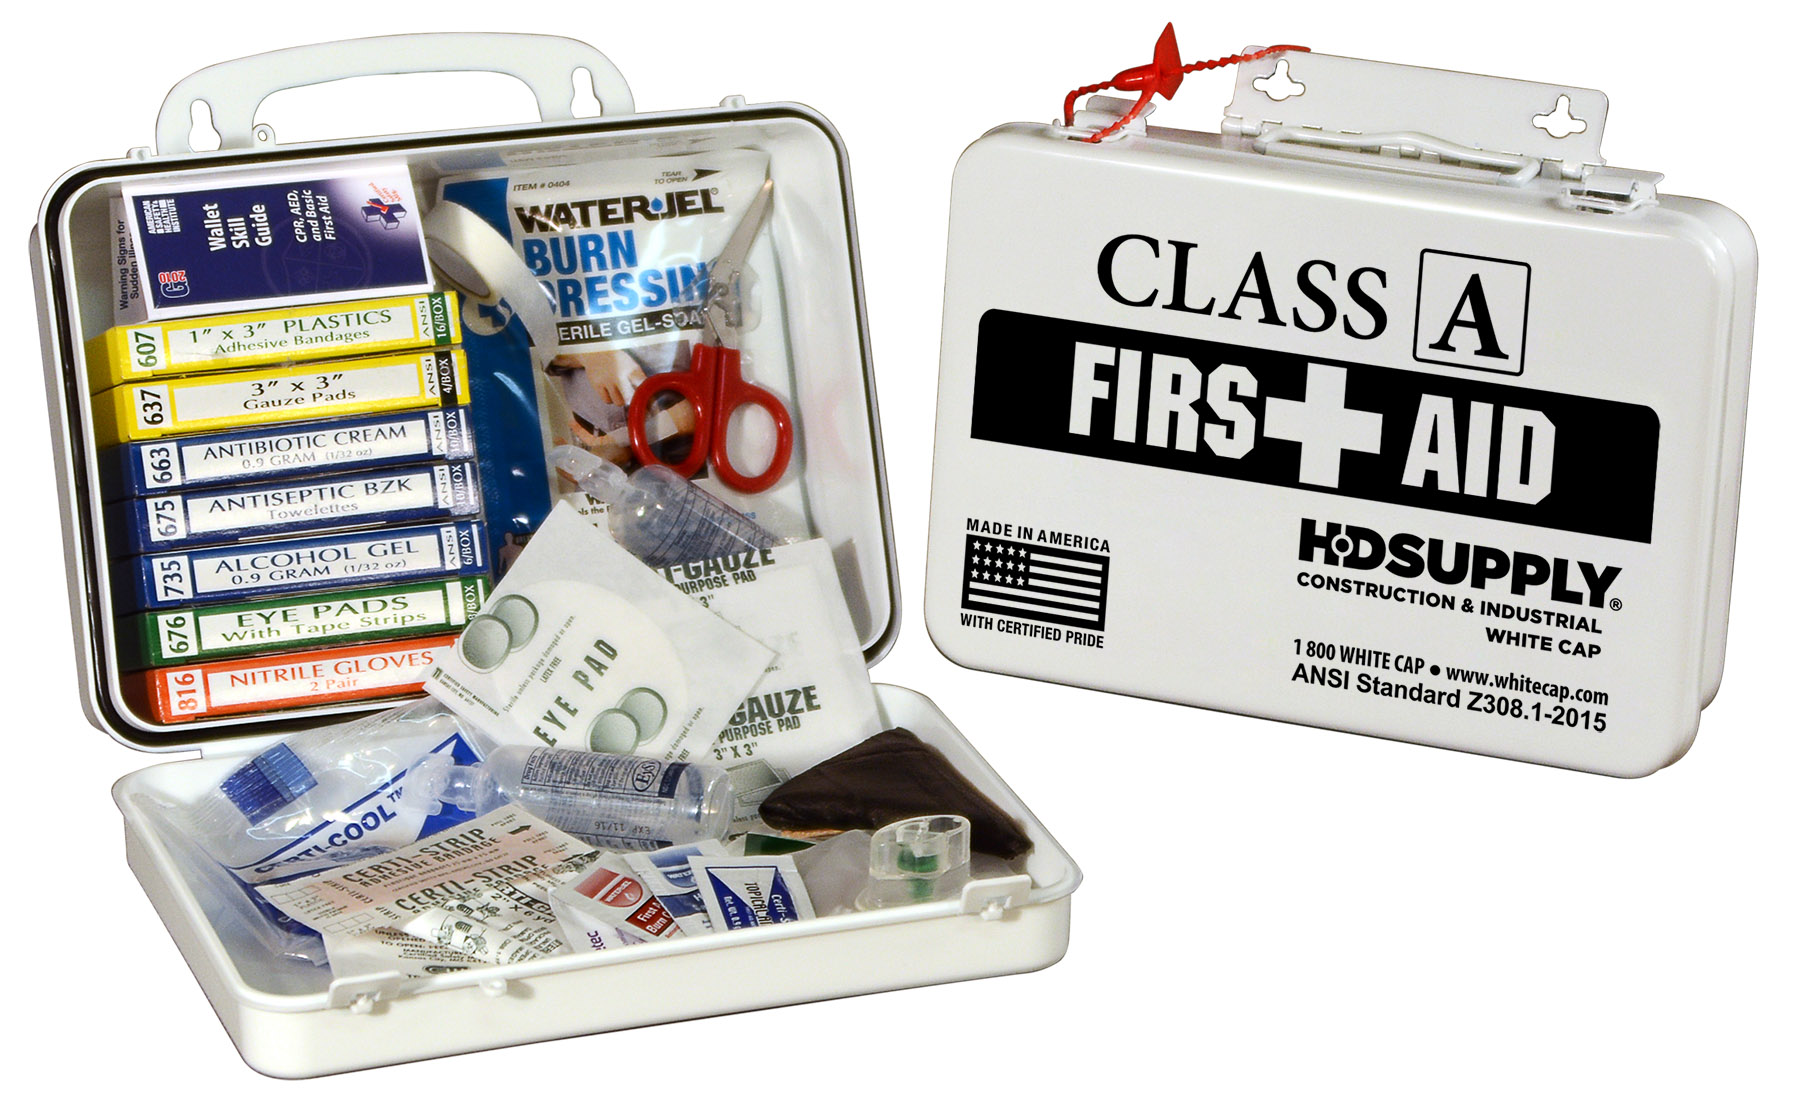 How Many Classes Of First Aid Kits Are There